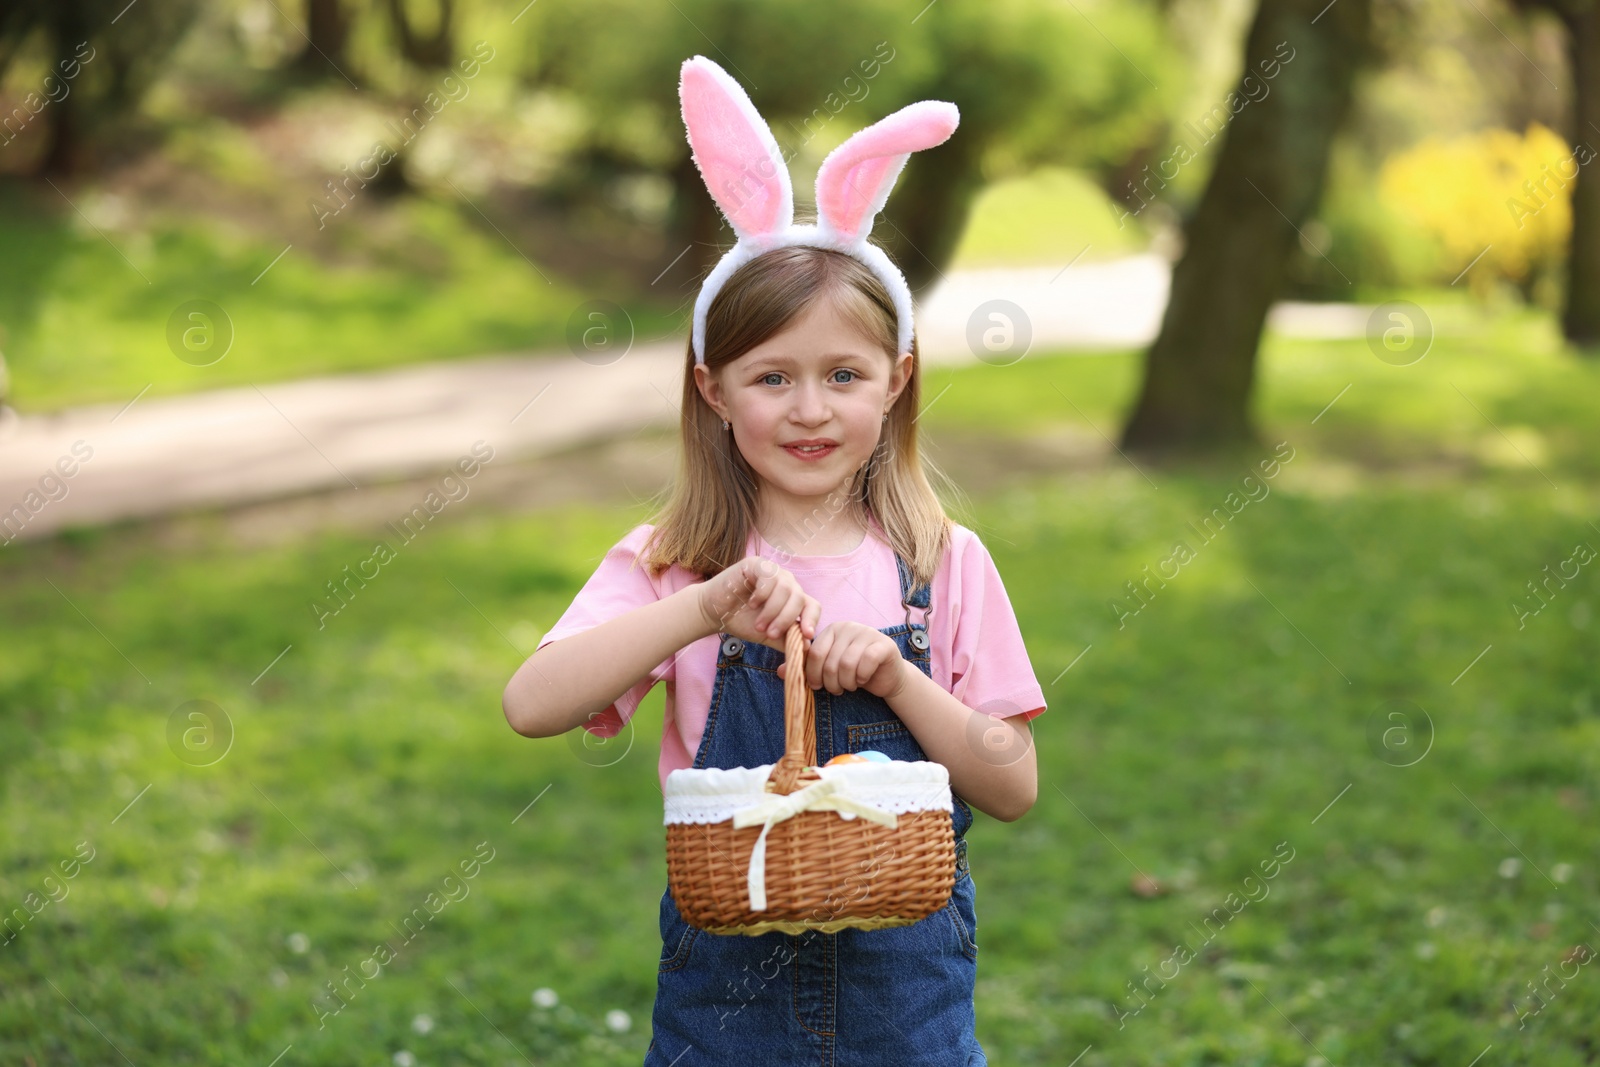 Photo of Easter celebration. Cute little girl with bunny ears holding wicker basket outdoors